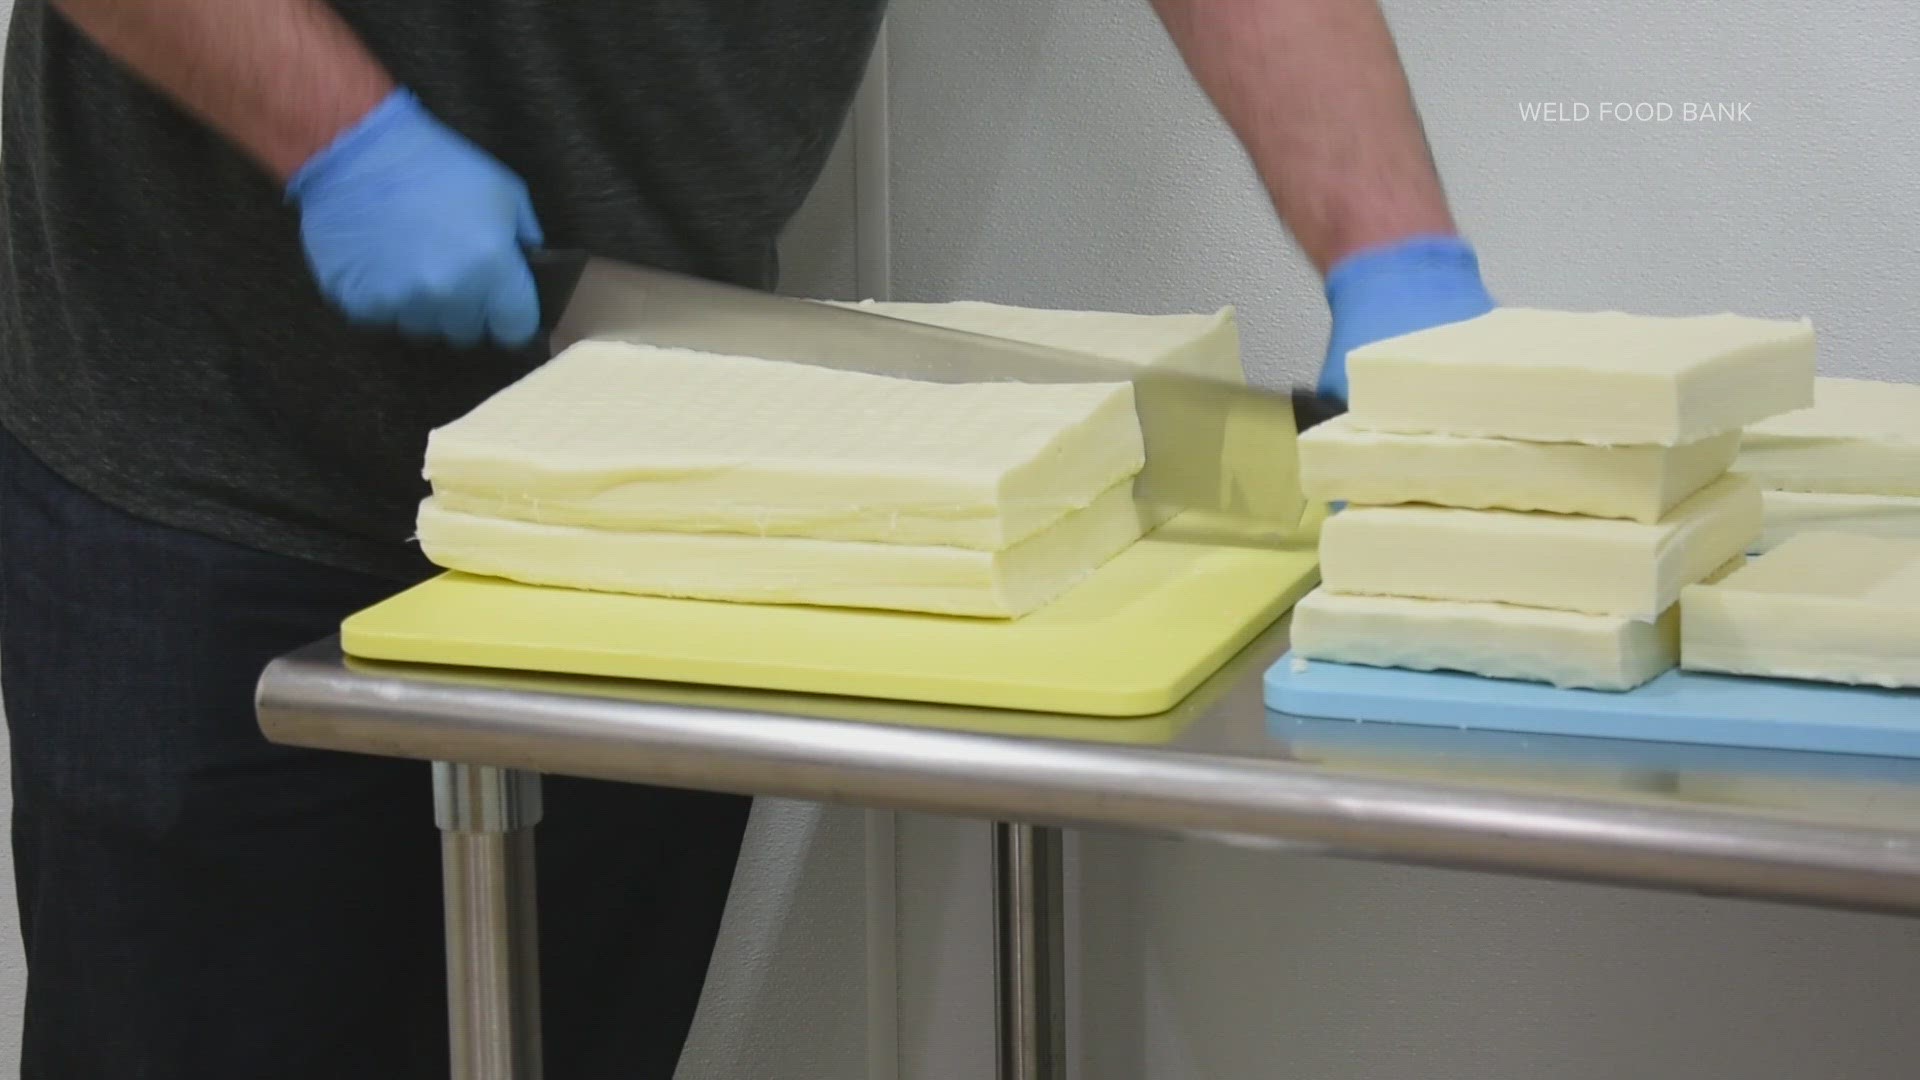 Leprino makes large blocks of mozzarella cheese, and donates about 1,000 pounds to Weld Food Bank each week.